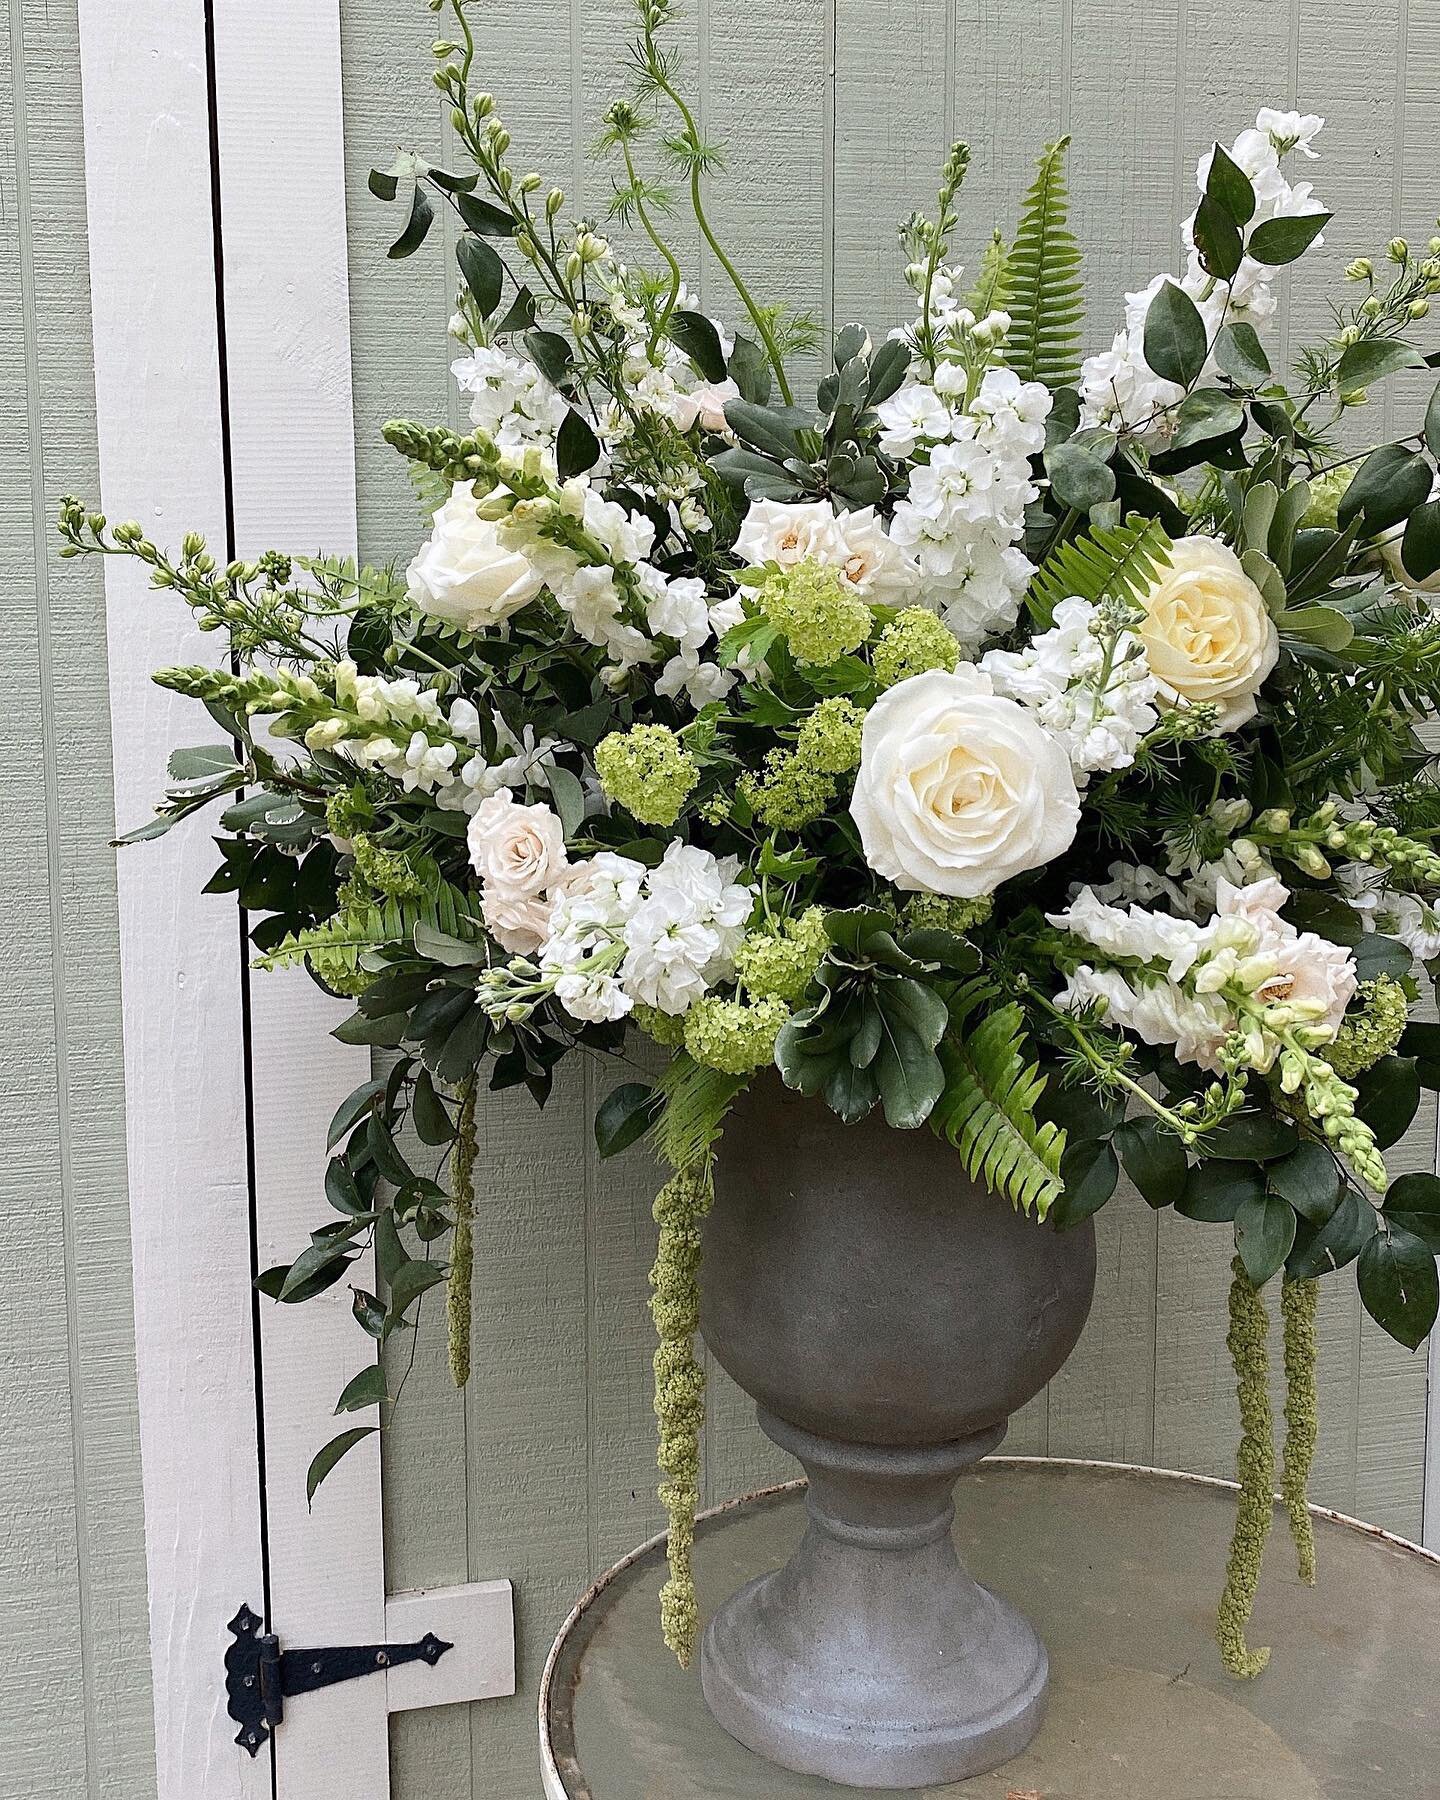 the inspiration for this urn arrangement (and wedding design as a whole) was rooted in southern grandeur, but with the air of being a bit overgrown, as if the flowers had been planted a little while ago and left to grow just a touch wild. We added ha